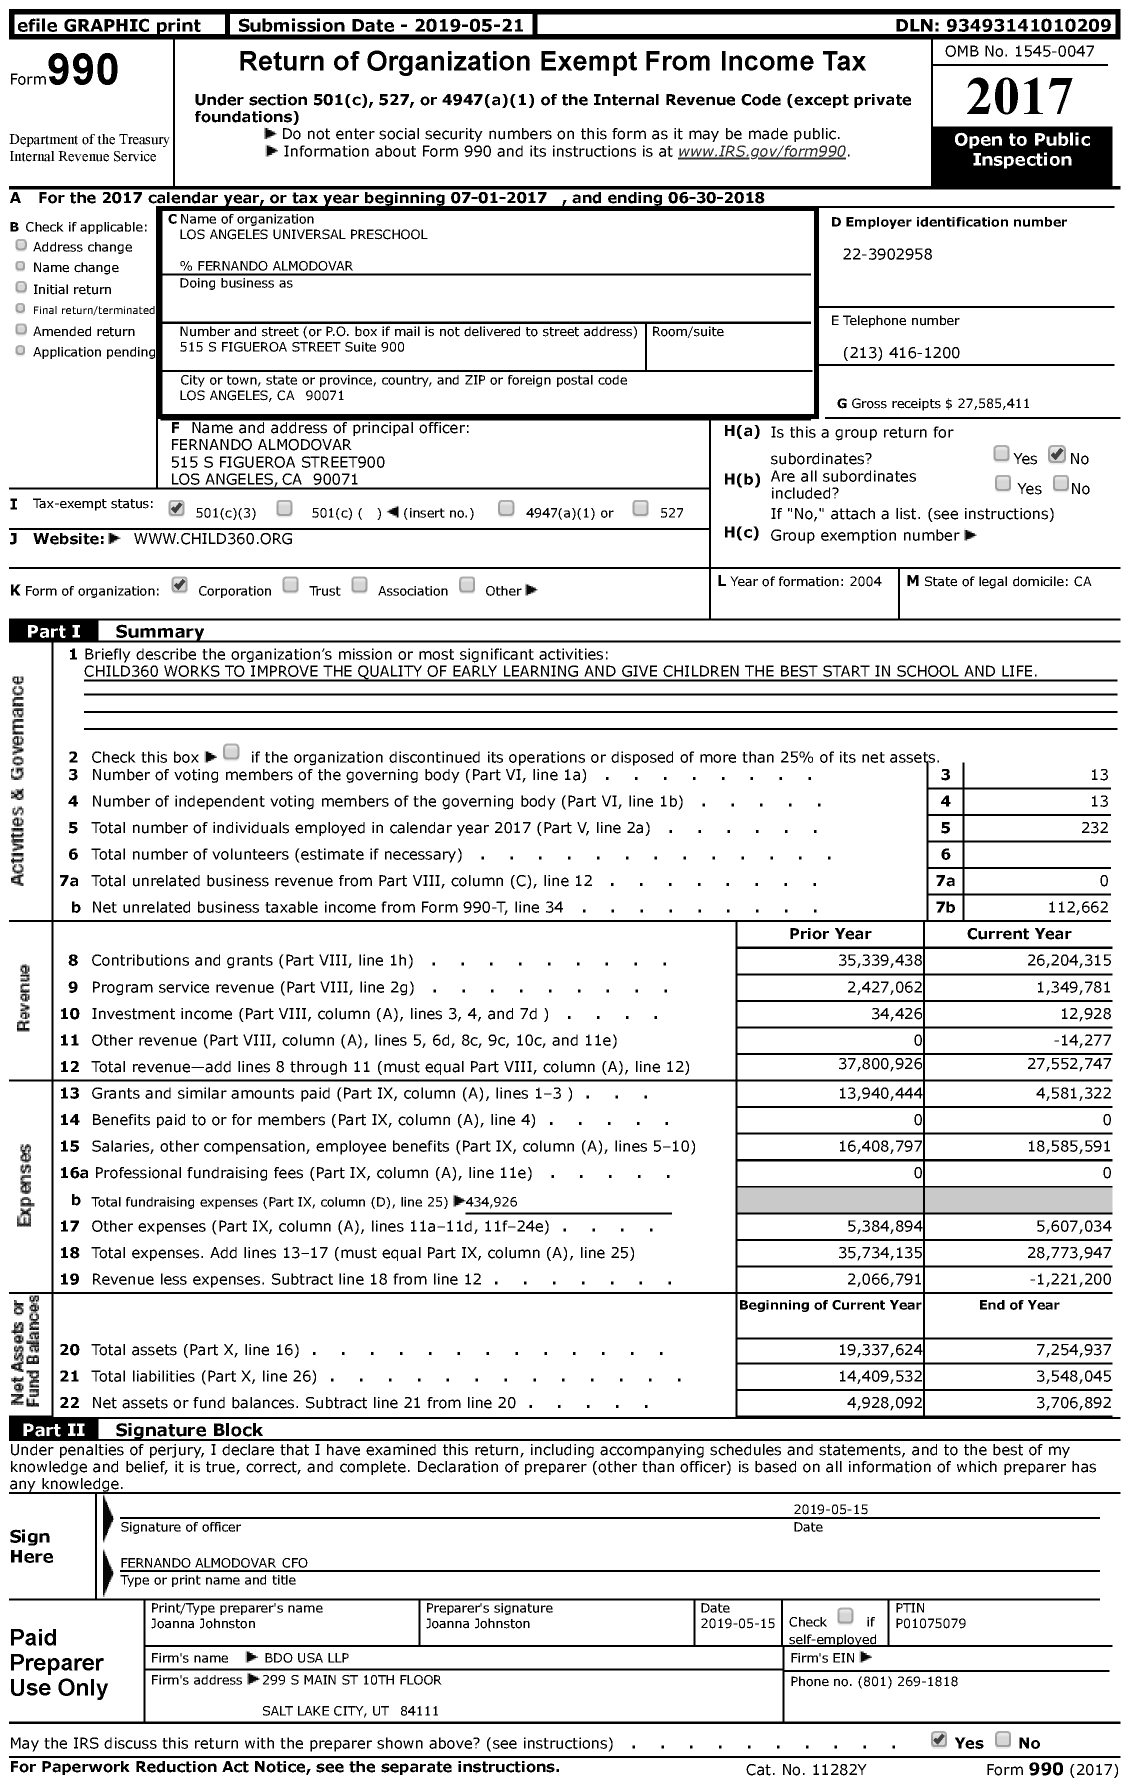 Image of first page of 2017 Form 990 for Child360